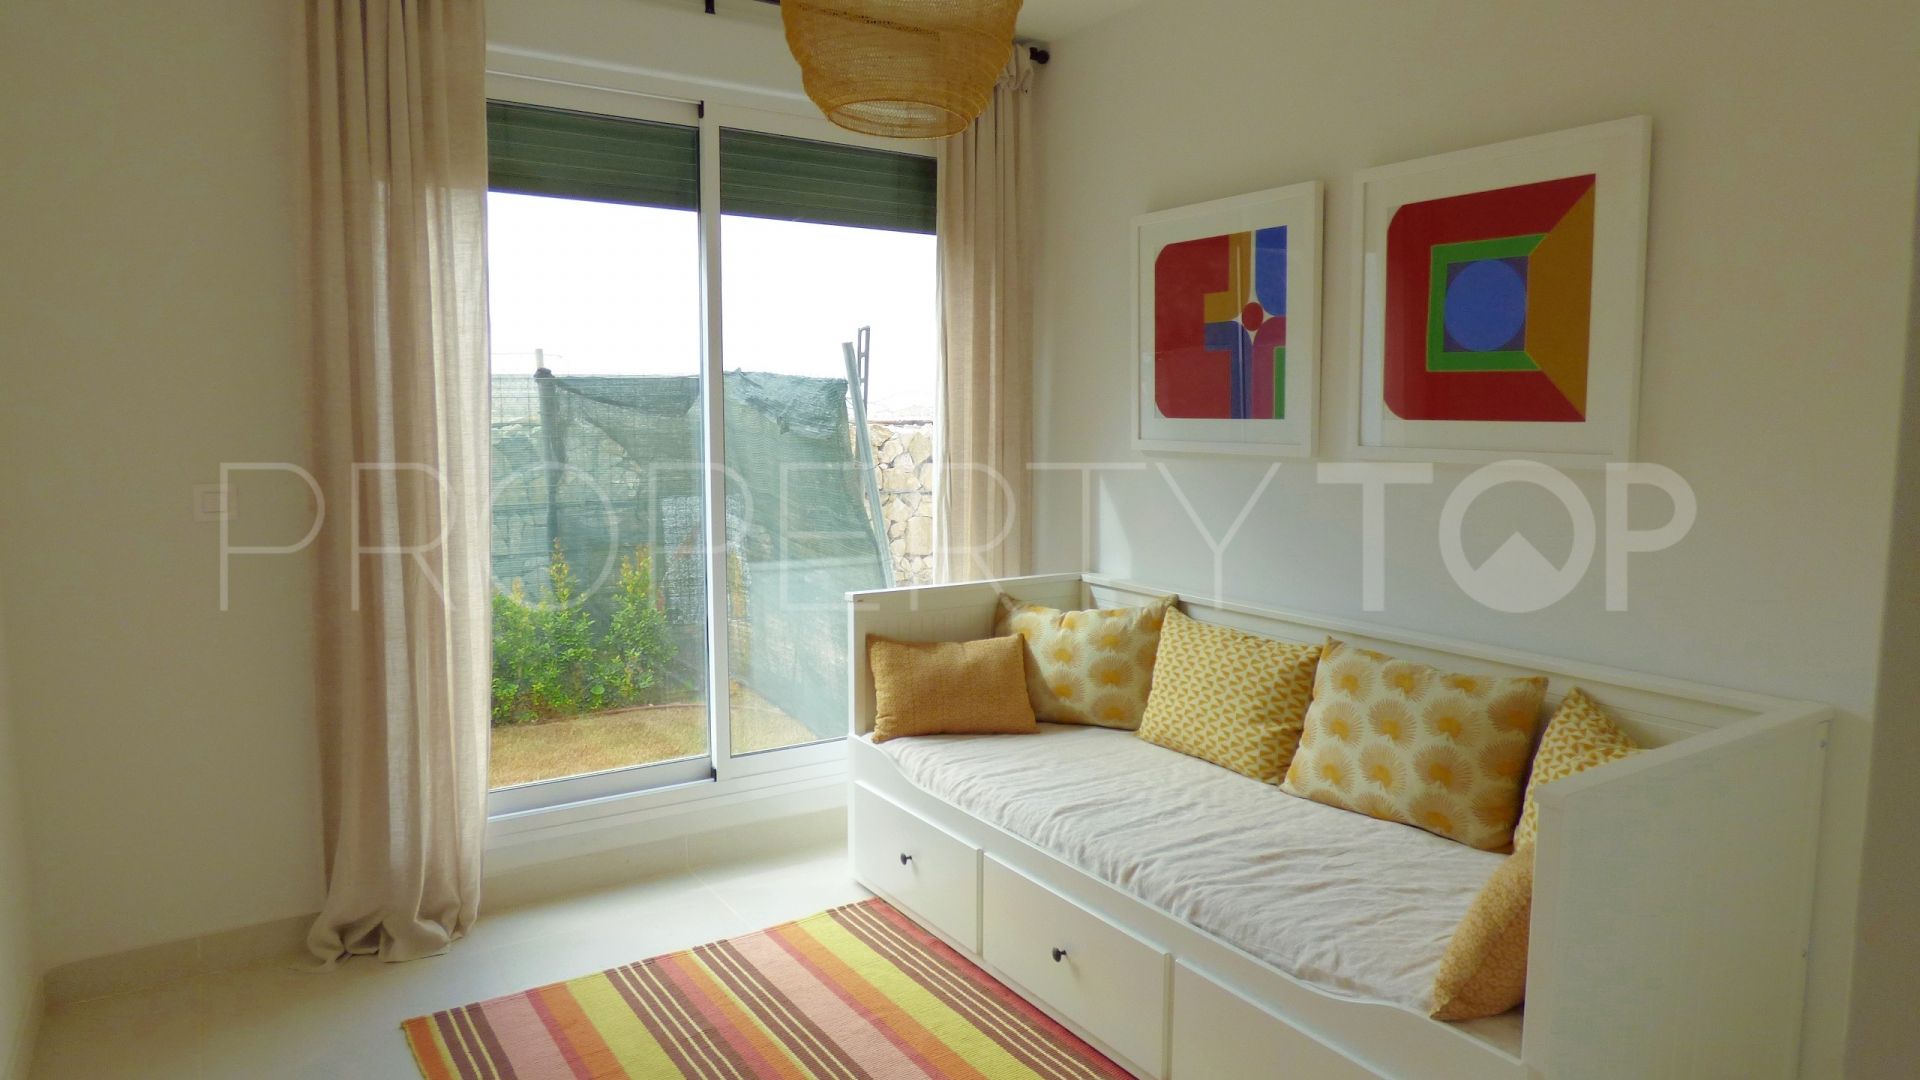 3 bedrooms ground floor apartment for sale in Sotogrande Alto Central